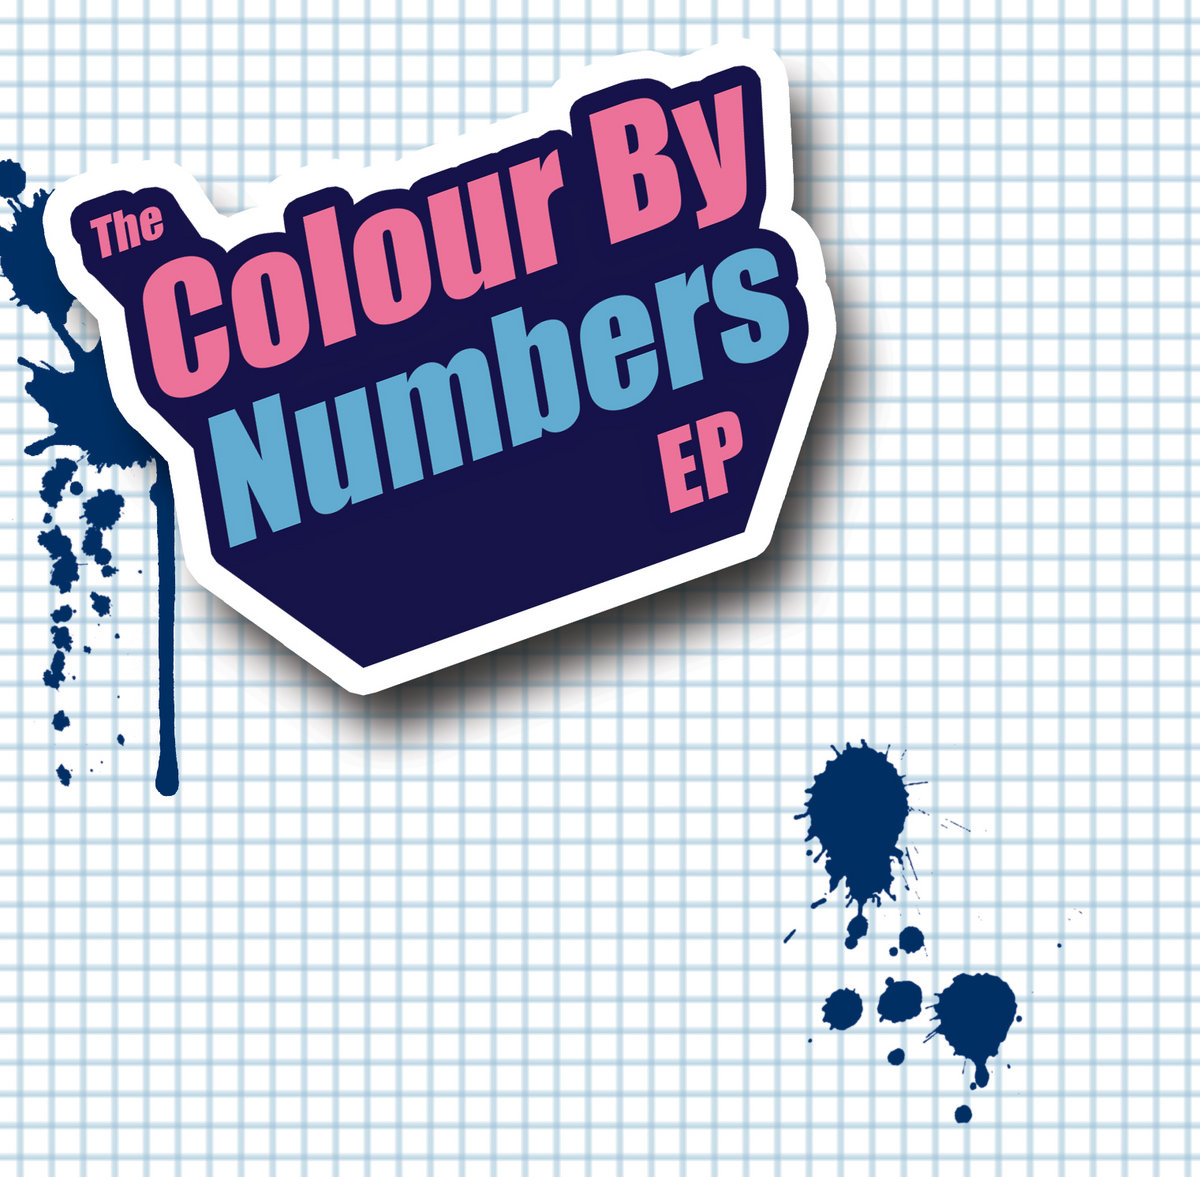 The Colour By Numbers EP | Colour By Numbers